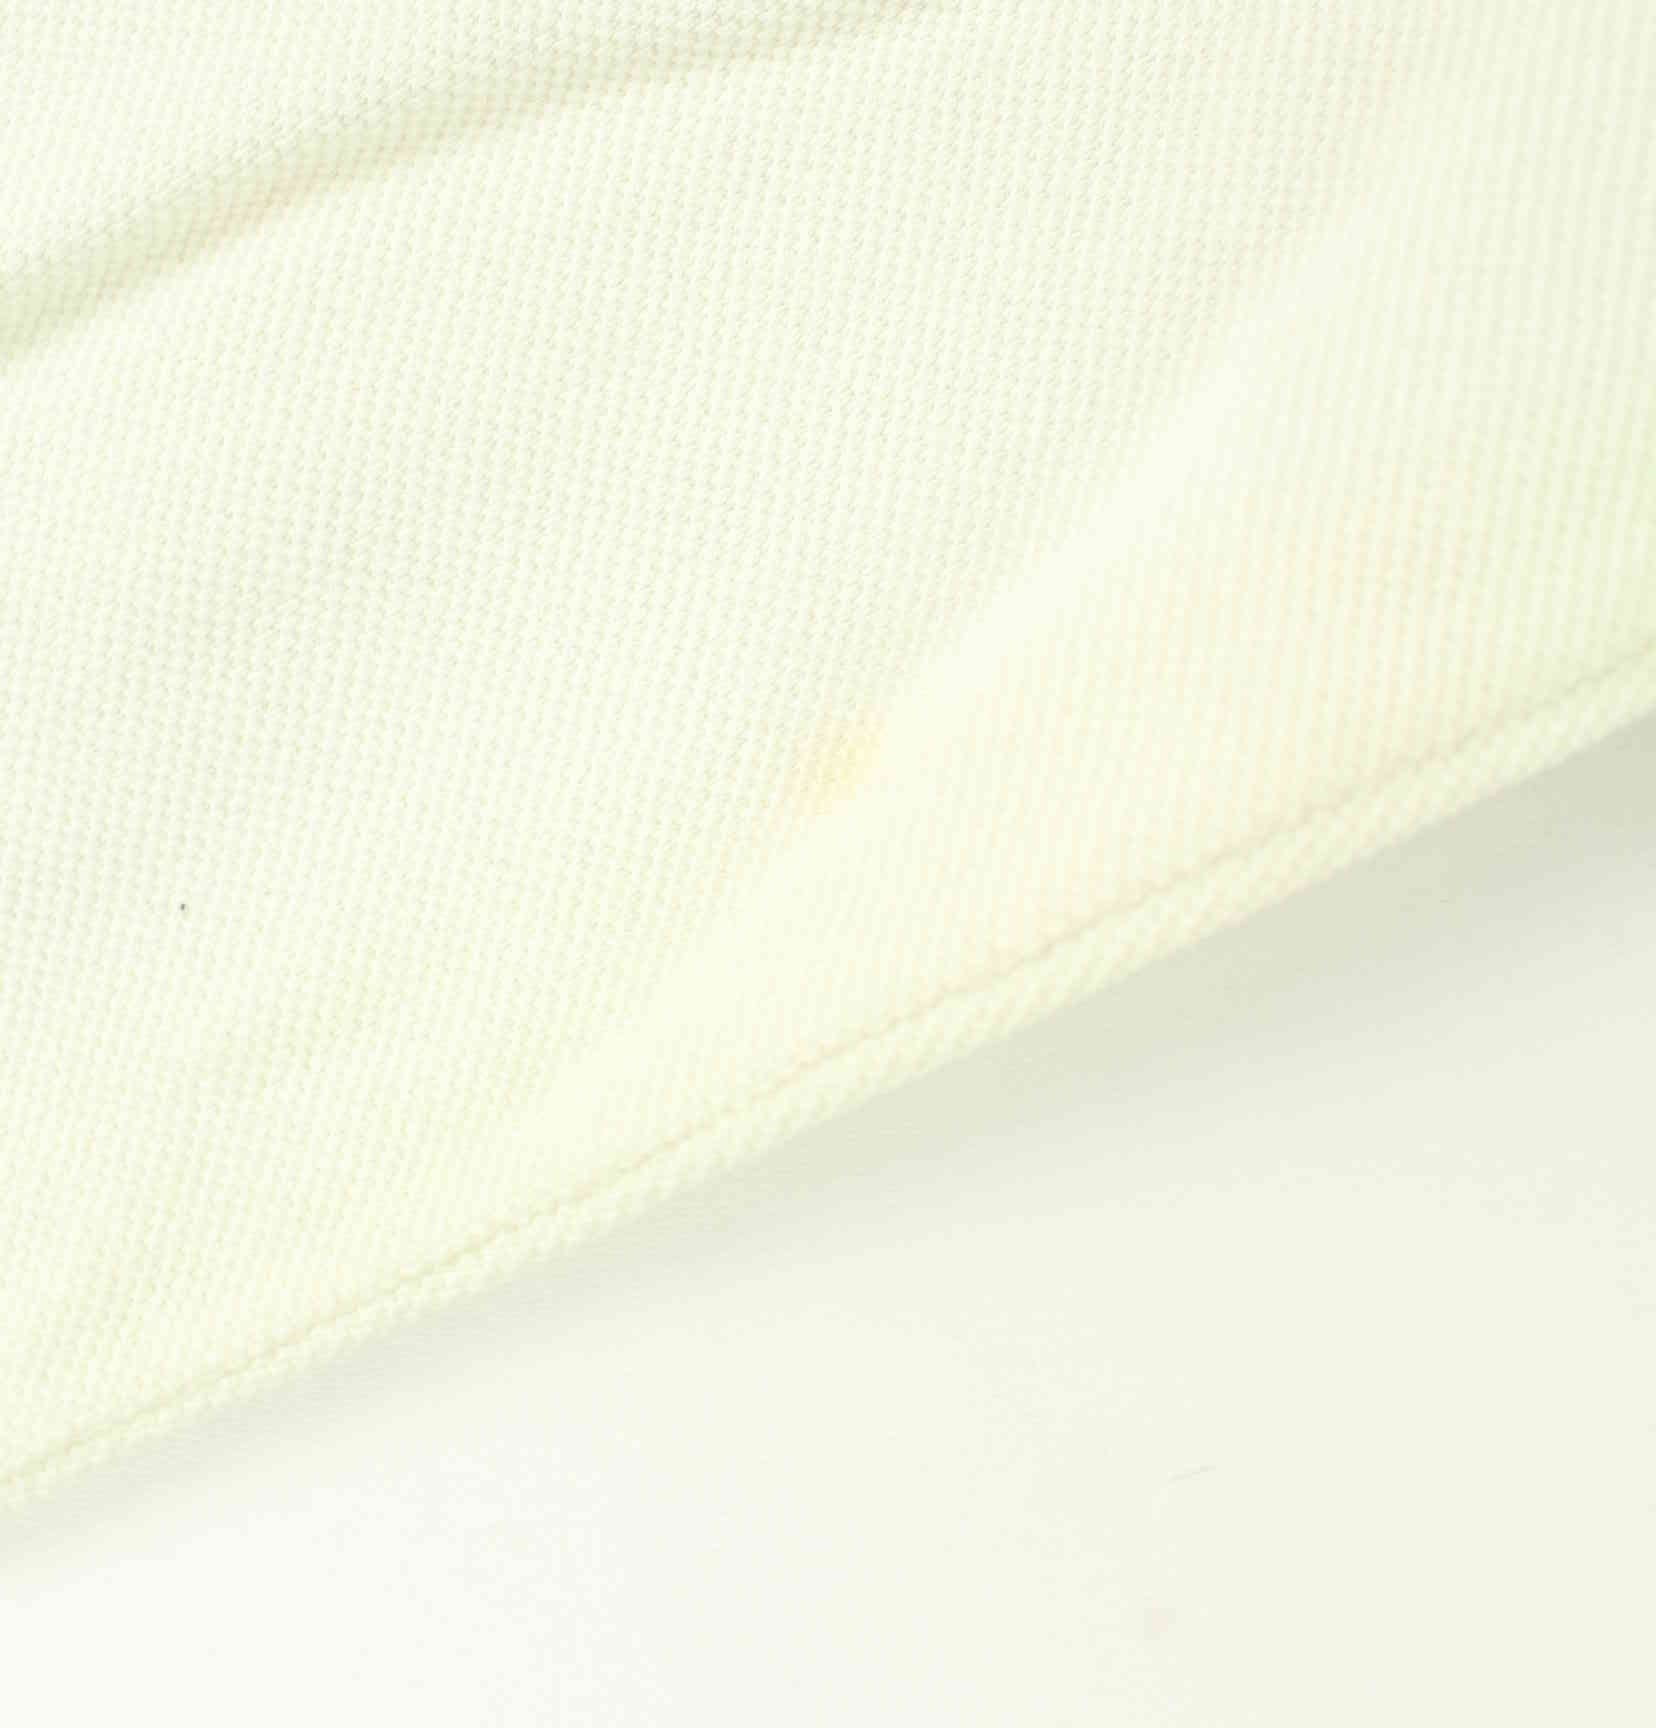 Lacoste 90s Vintage Polo Sweater Beige M (detail image 8)